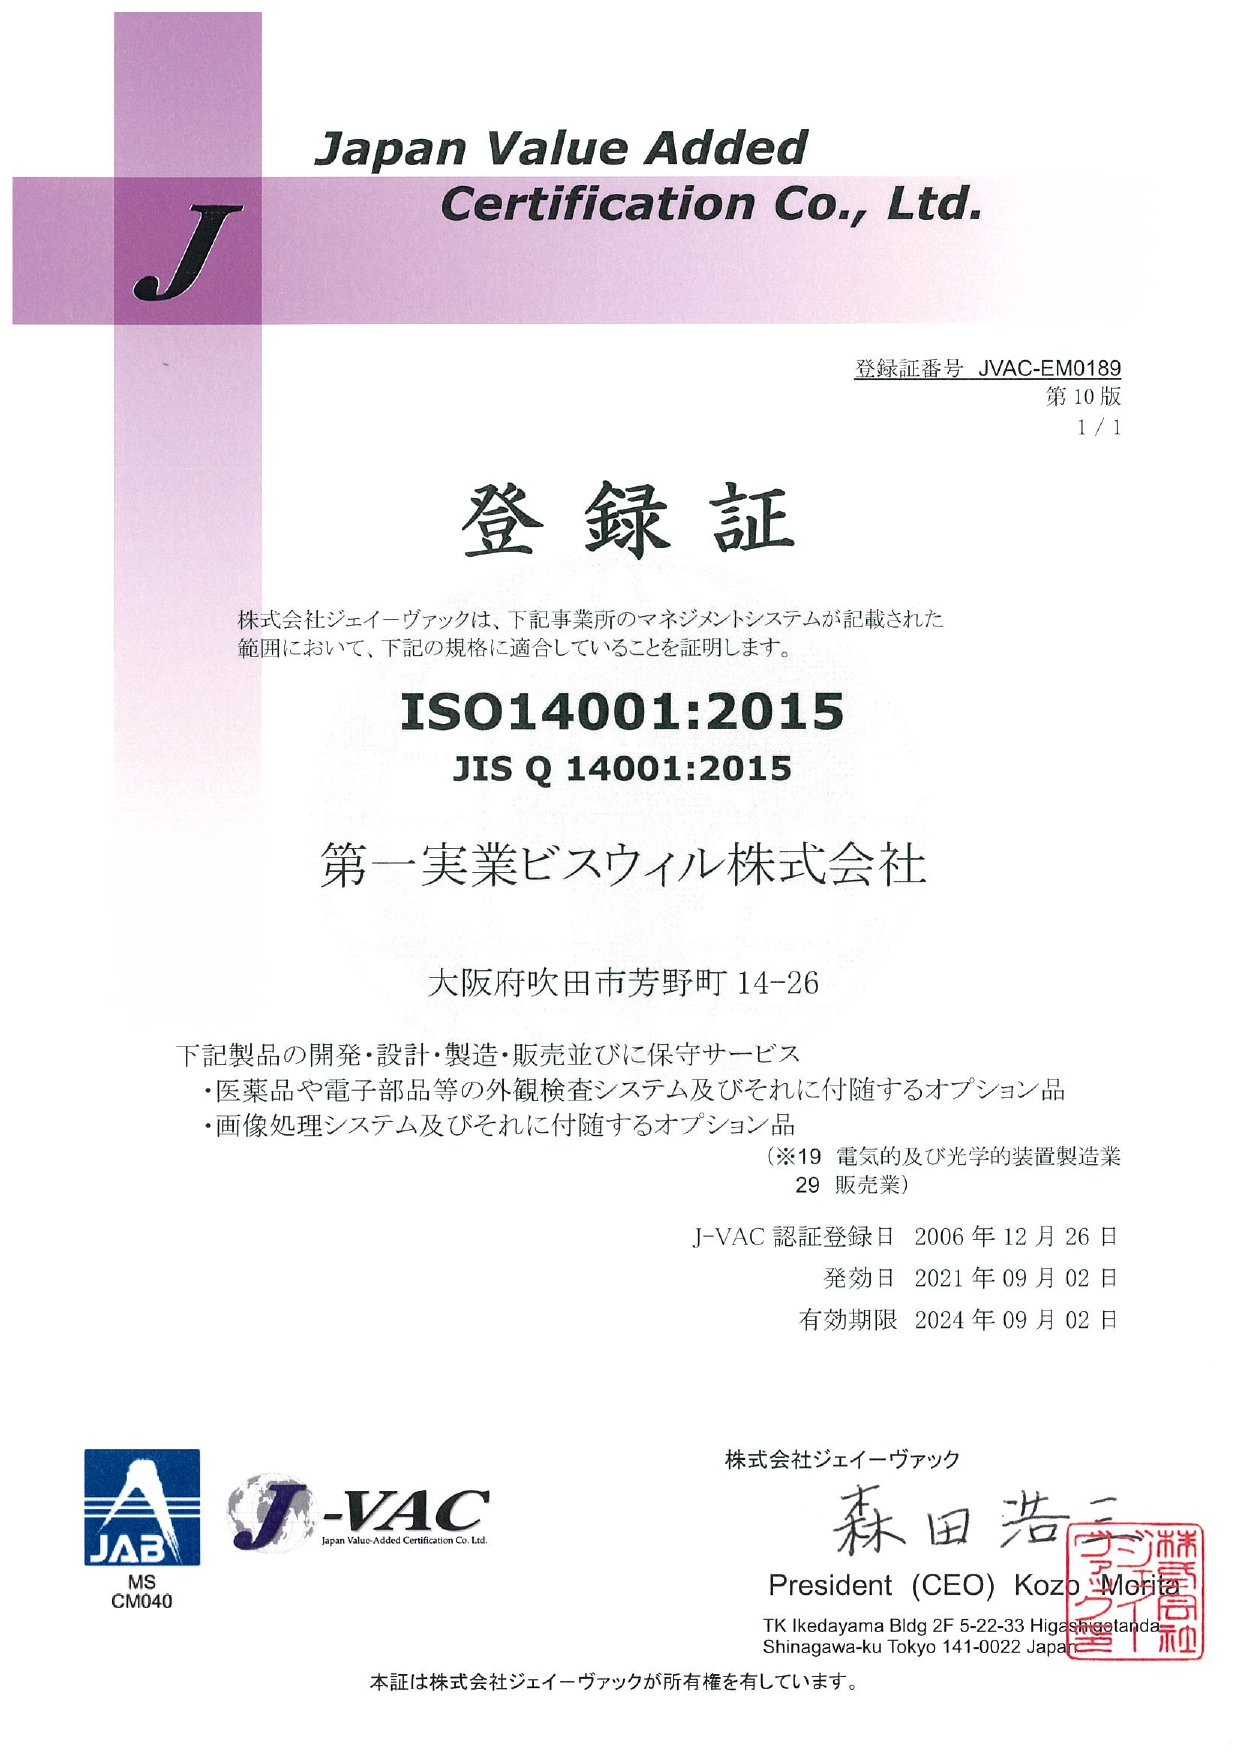 Acquisition of ISO 14001